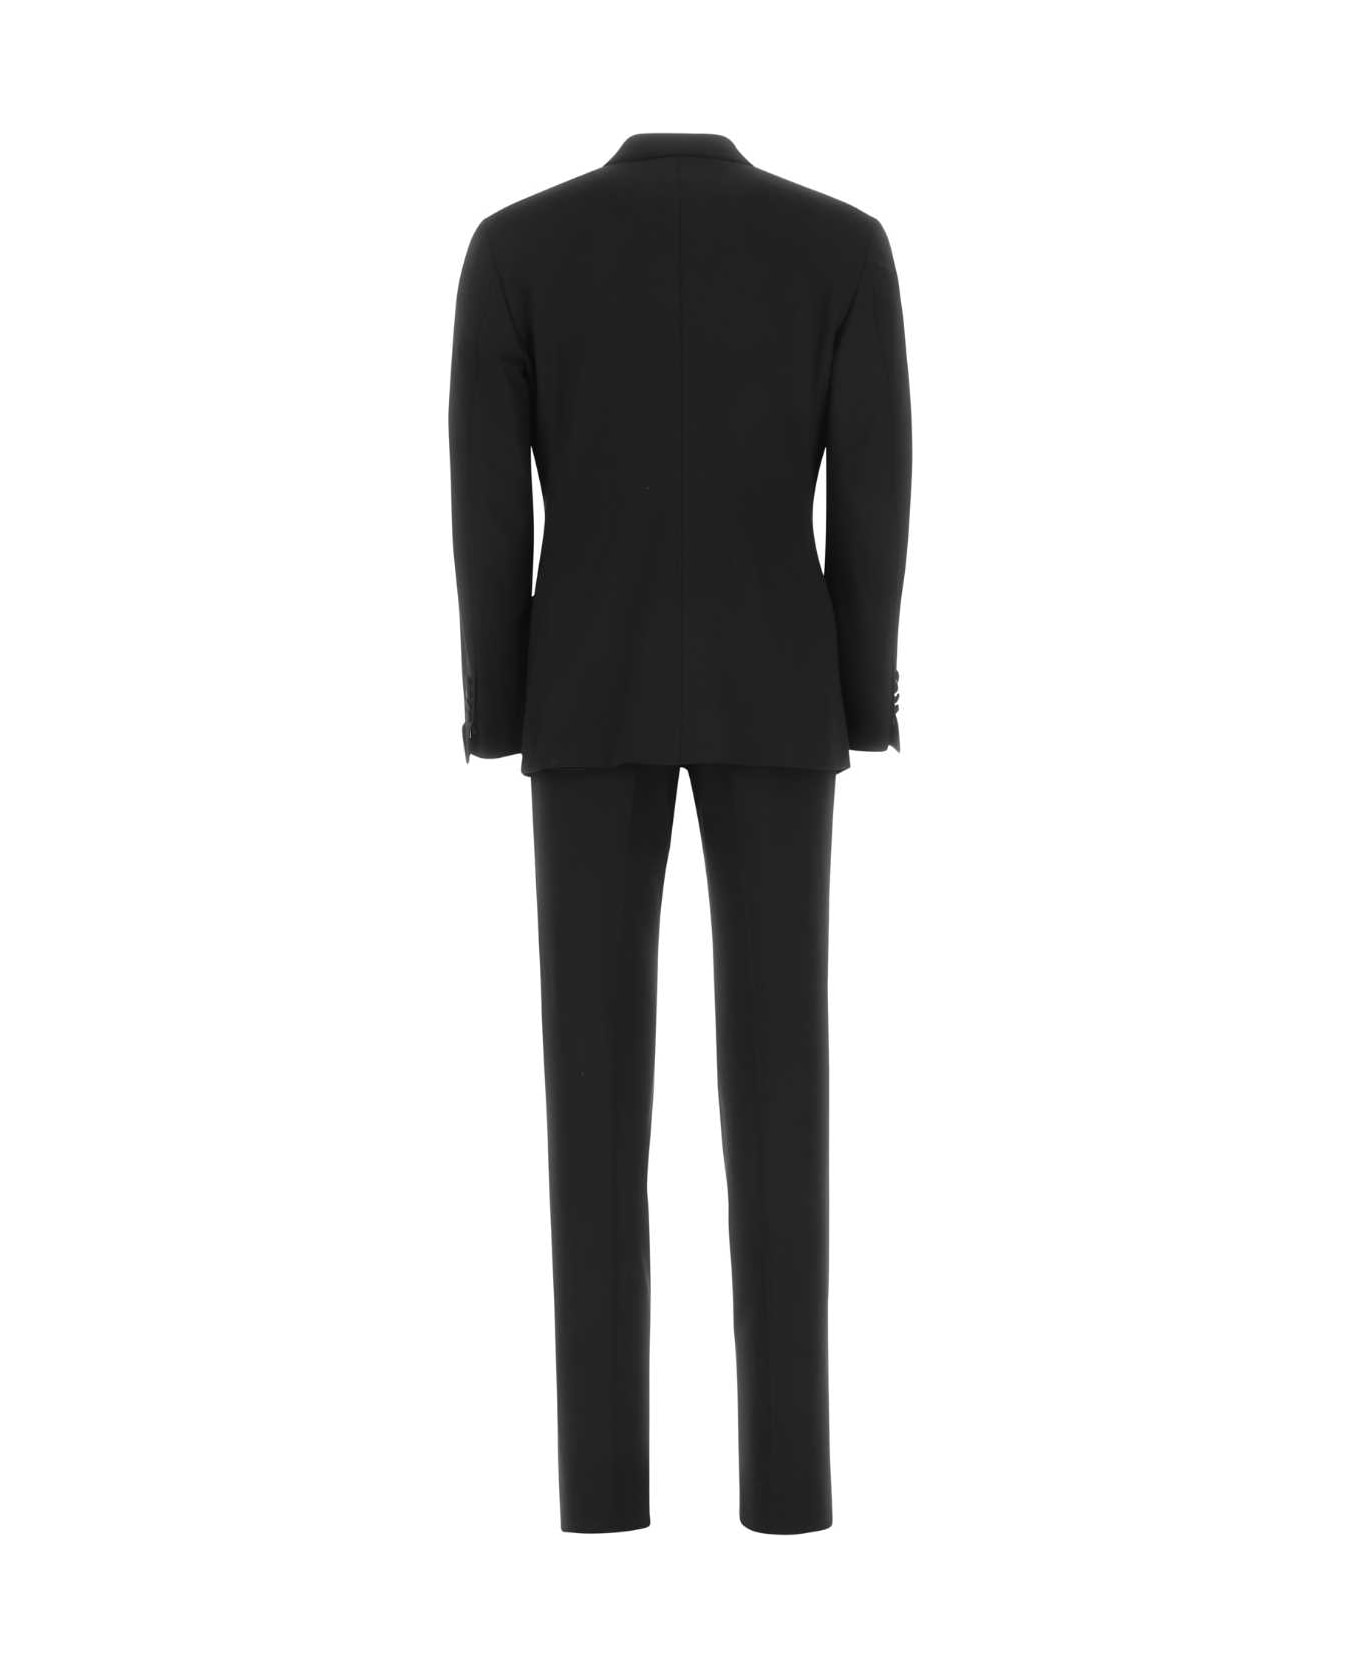 Tom Ford Black Stretch Wool Suit - 7